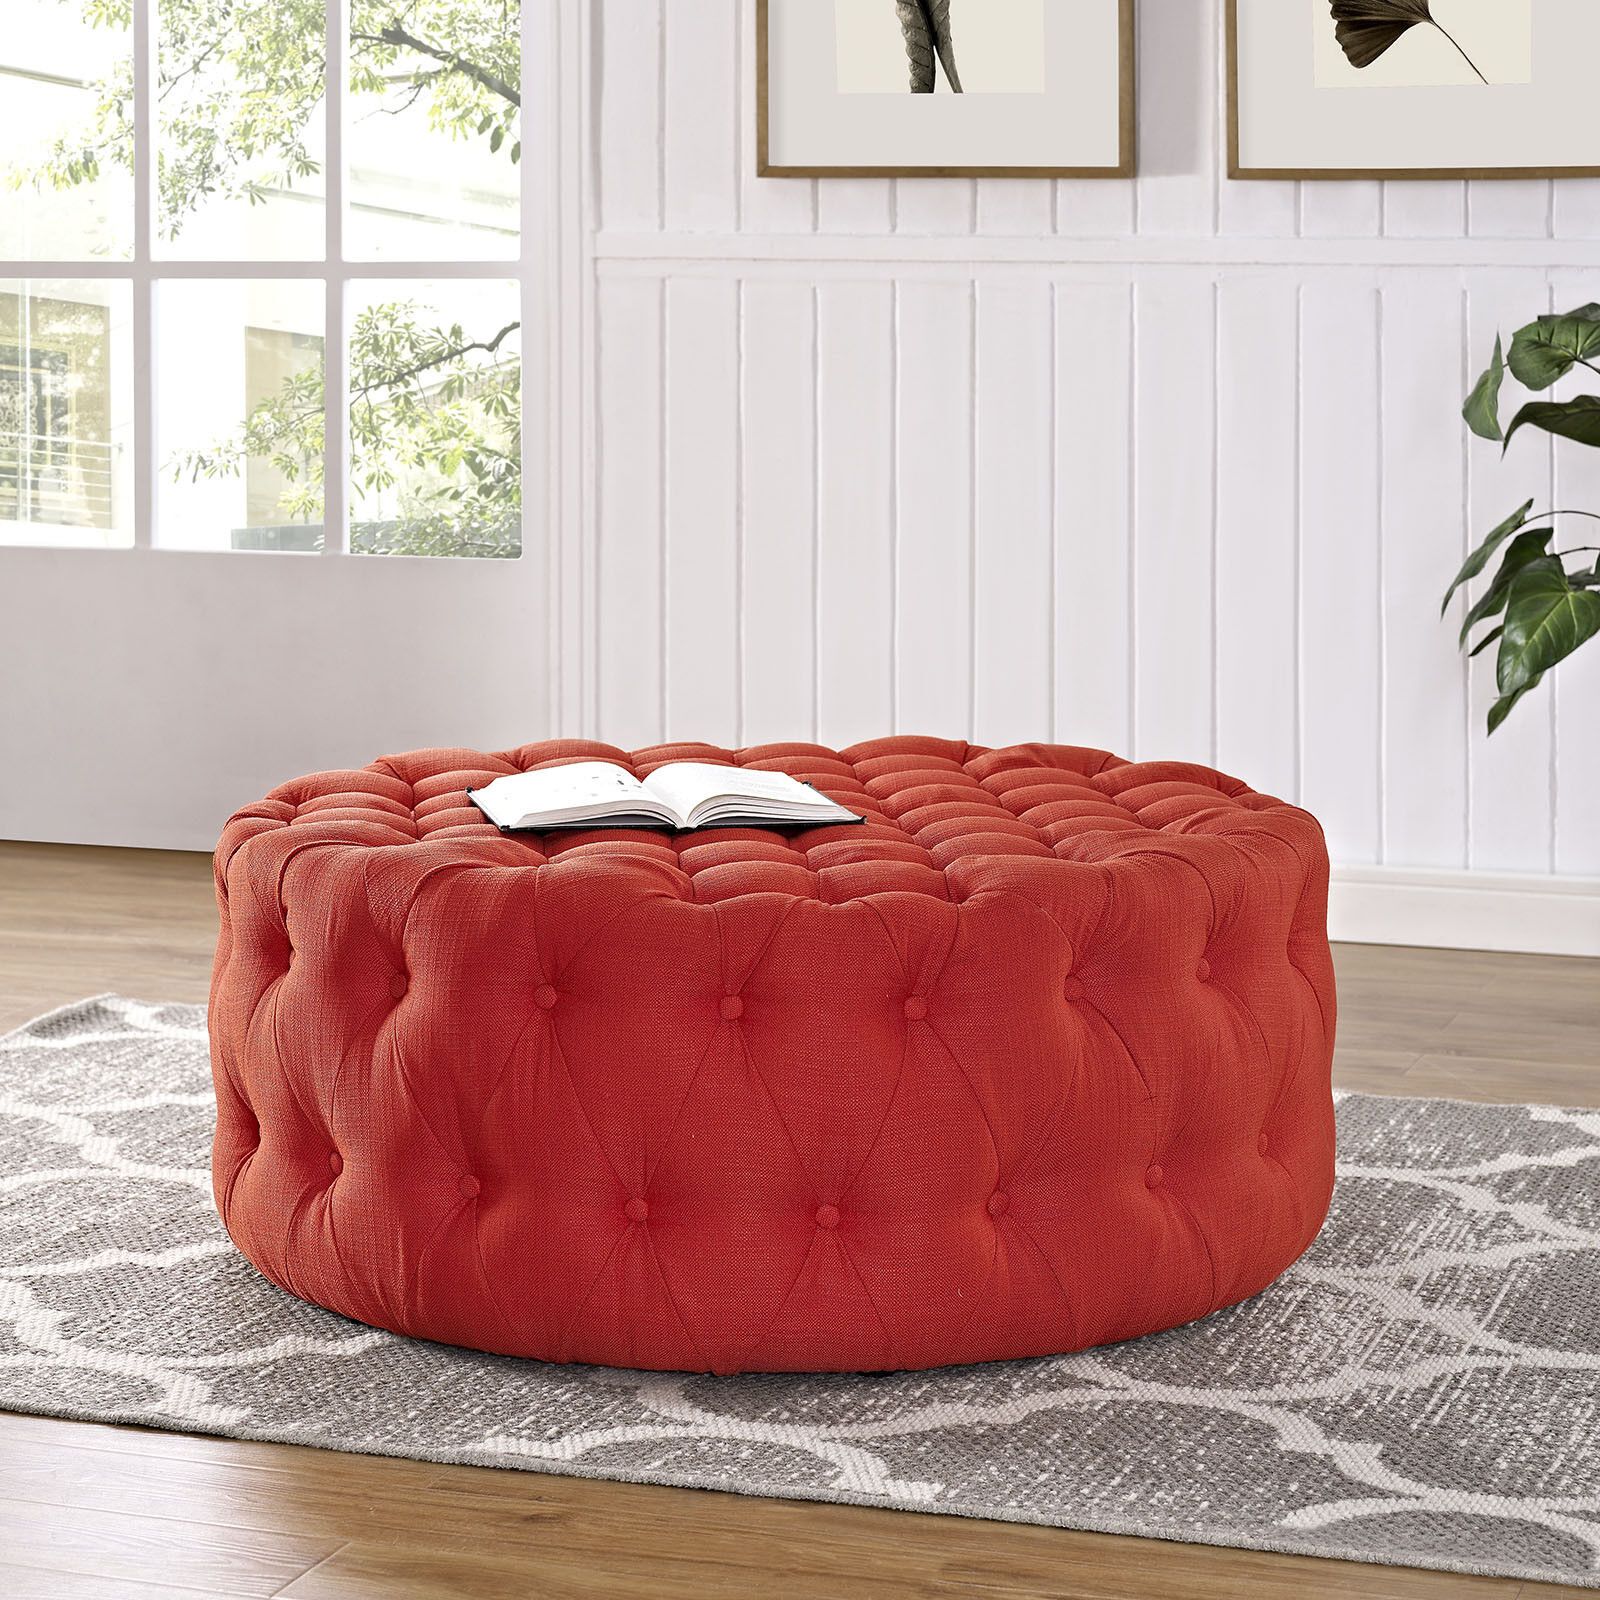 Button Tufted Fabric Upholstered Round Ottoman In Atomic Red Intended For Round Black Tasseled Ottomans (View 4 of 20)